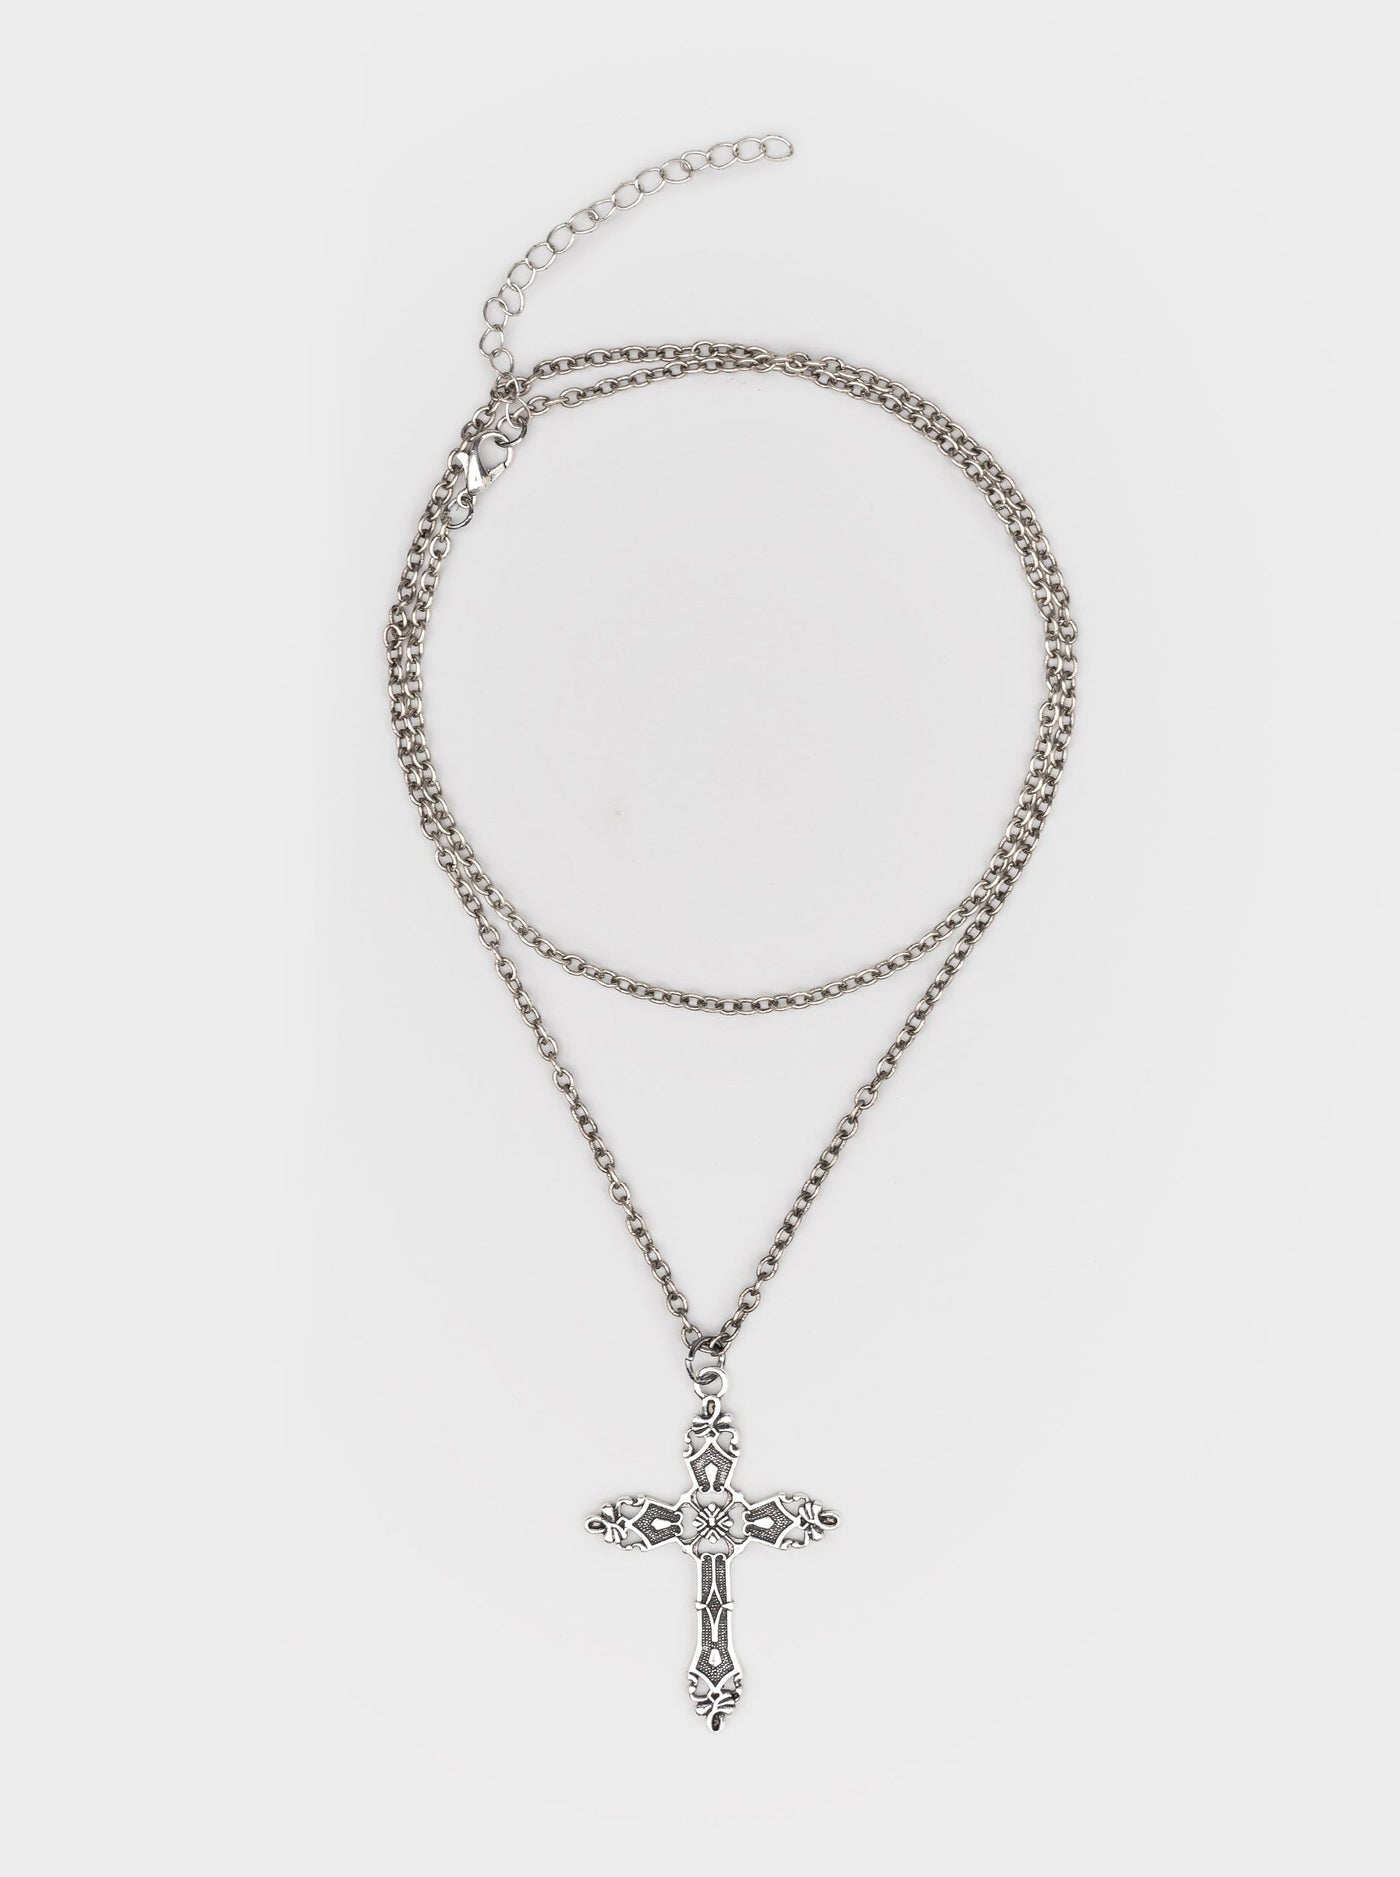 Silver necklace with cross pendant